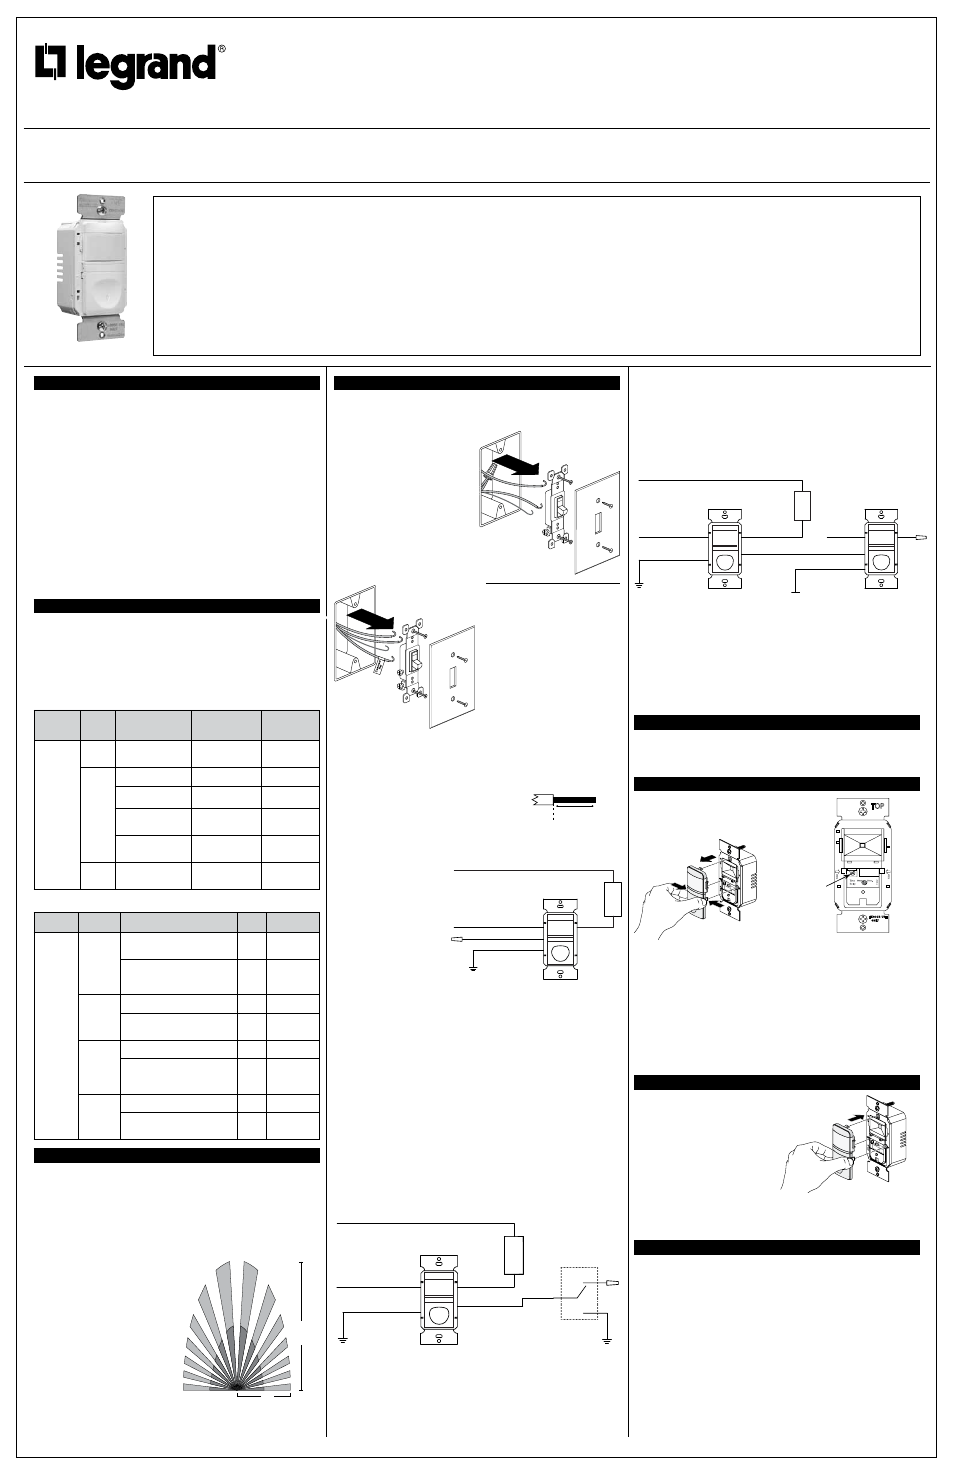 Diagram Pass Seymour Dimmer Switch Wiring Diagrams Full Version Hd Quality Wiring Diagrams Drawkaro Misslife It